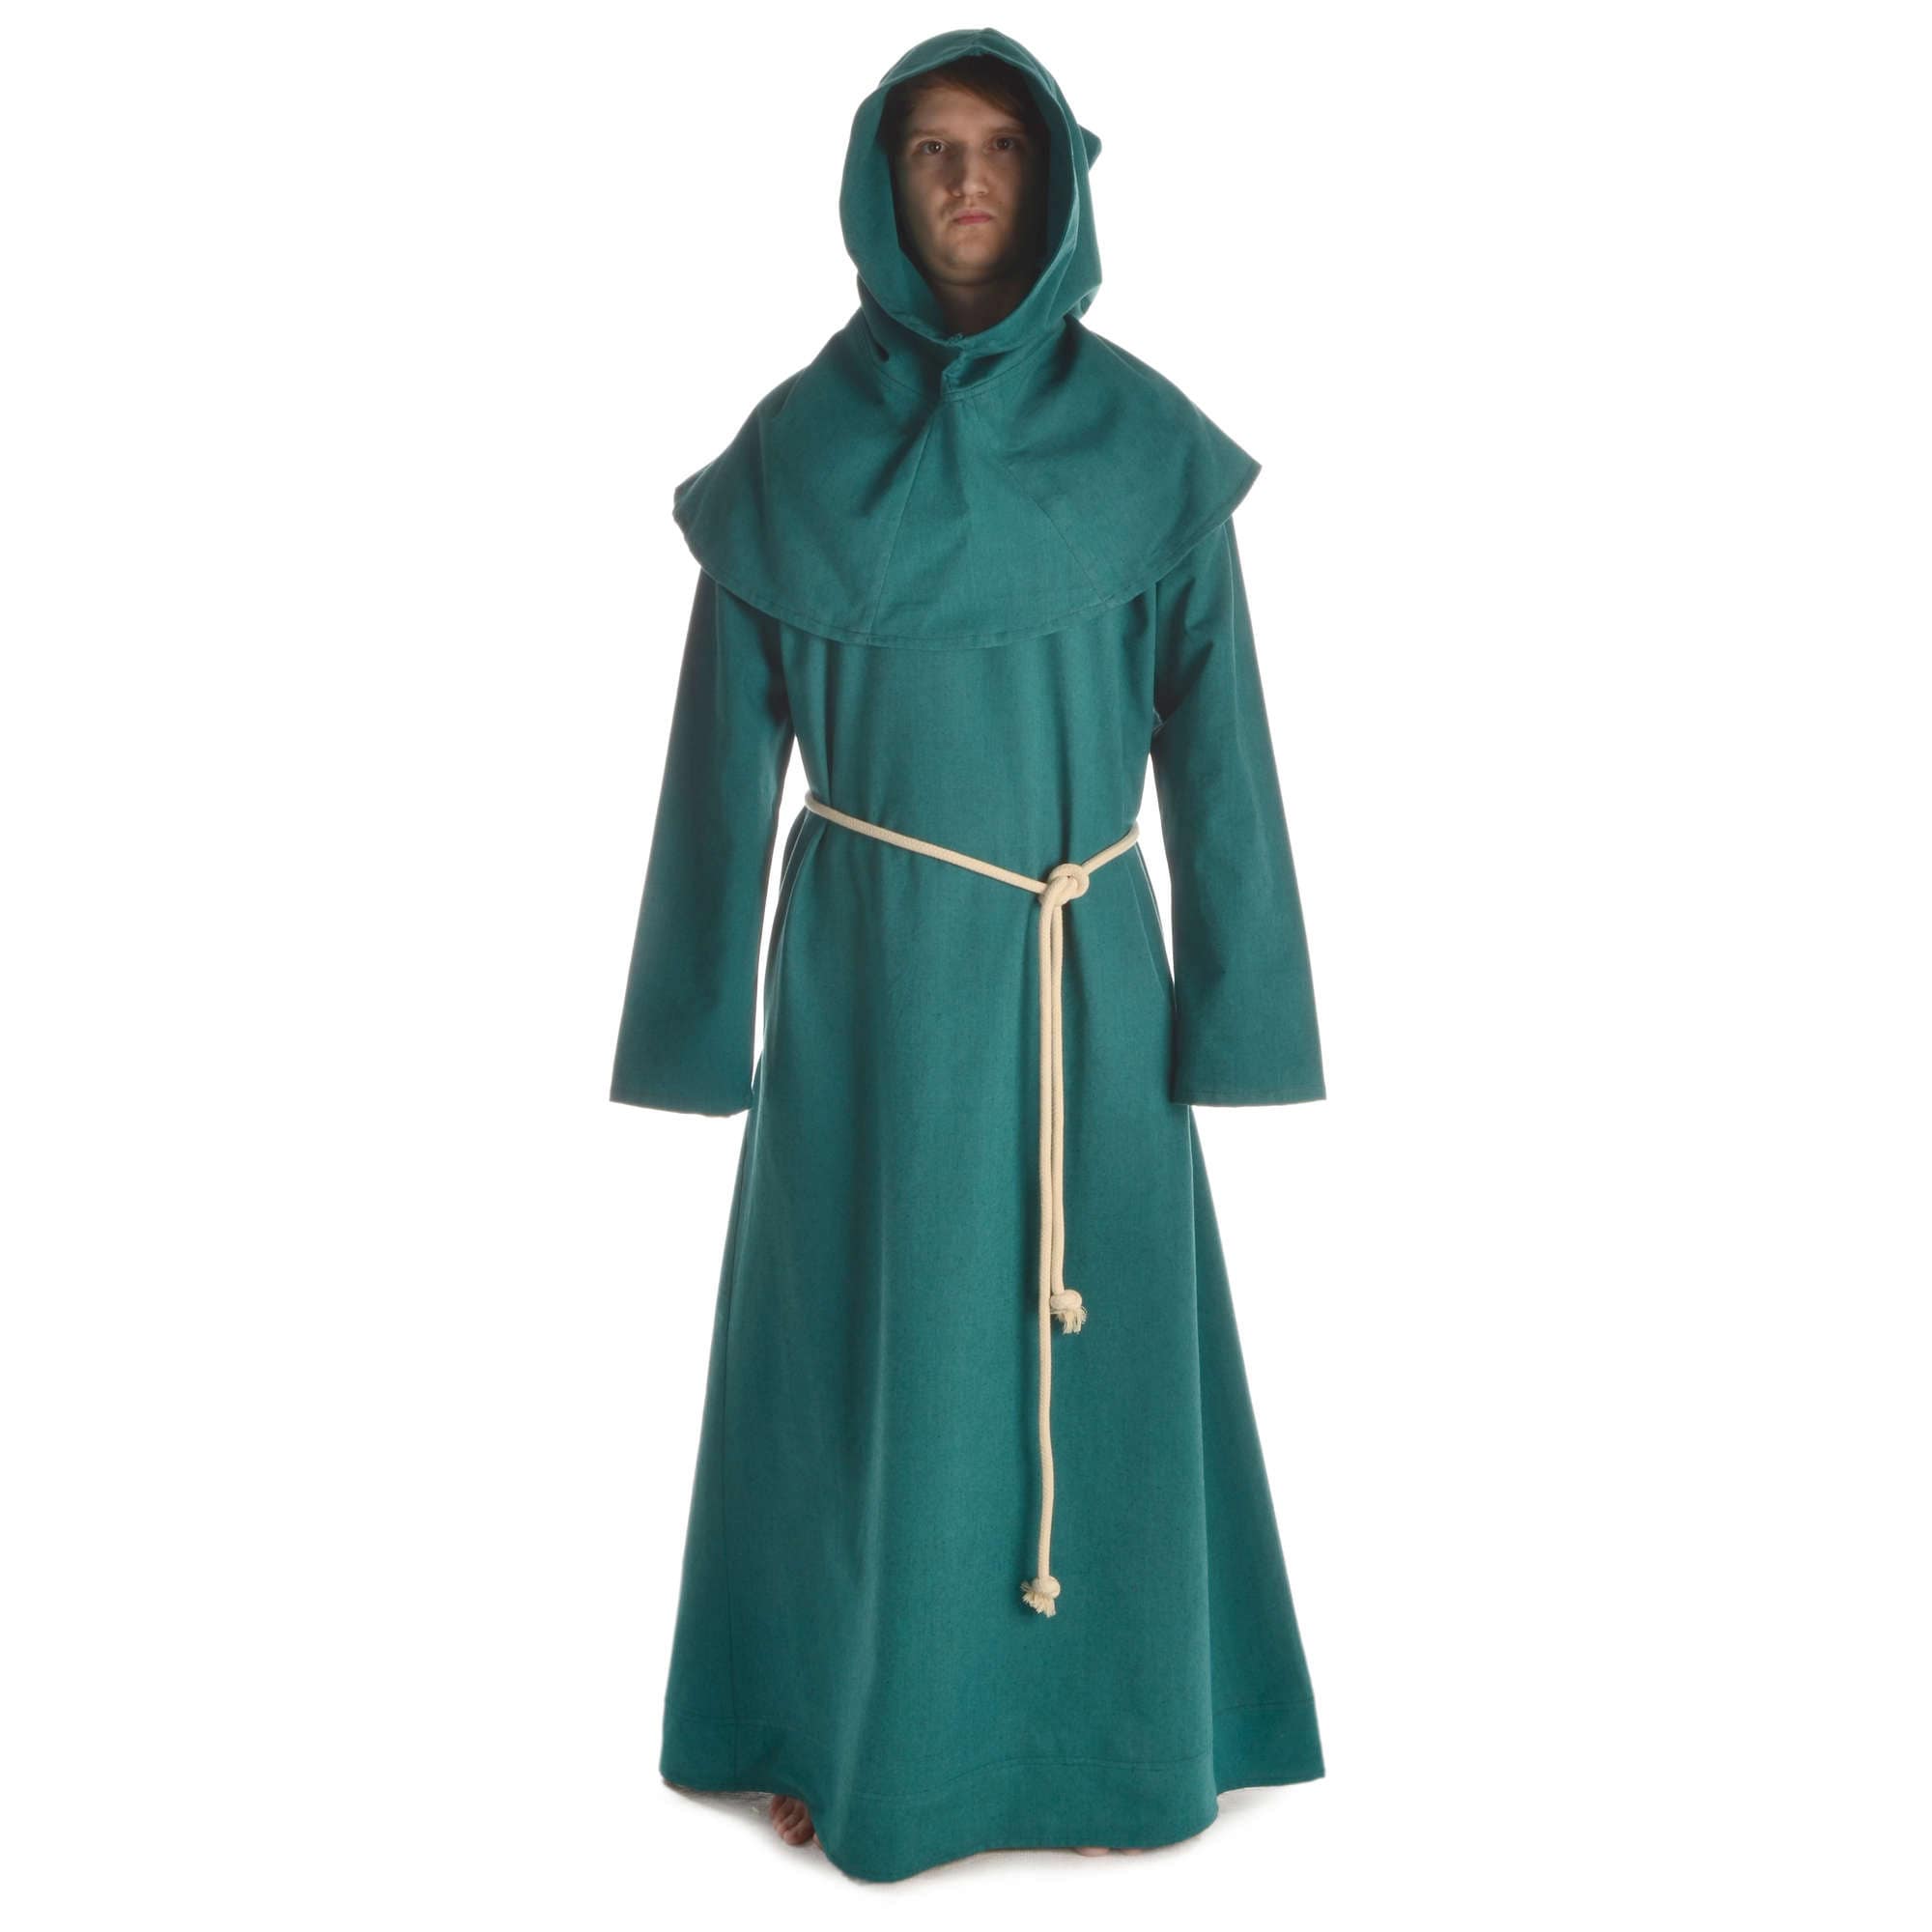 Medieval Robe for Monk, Priest, Sorcerer Medieval Cowl set: Tunic, Hood,  Knit Made of Cotton in Green, Blue, Red HEMAD 